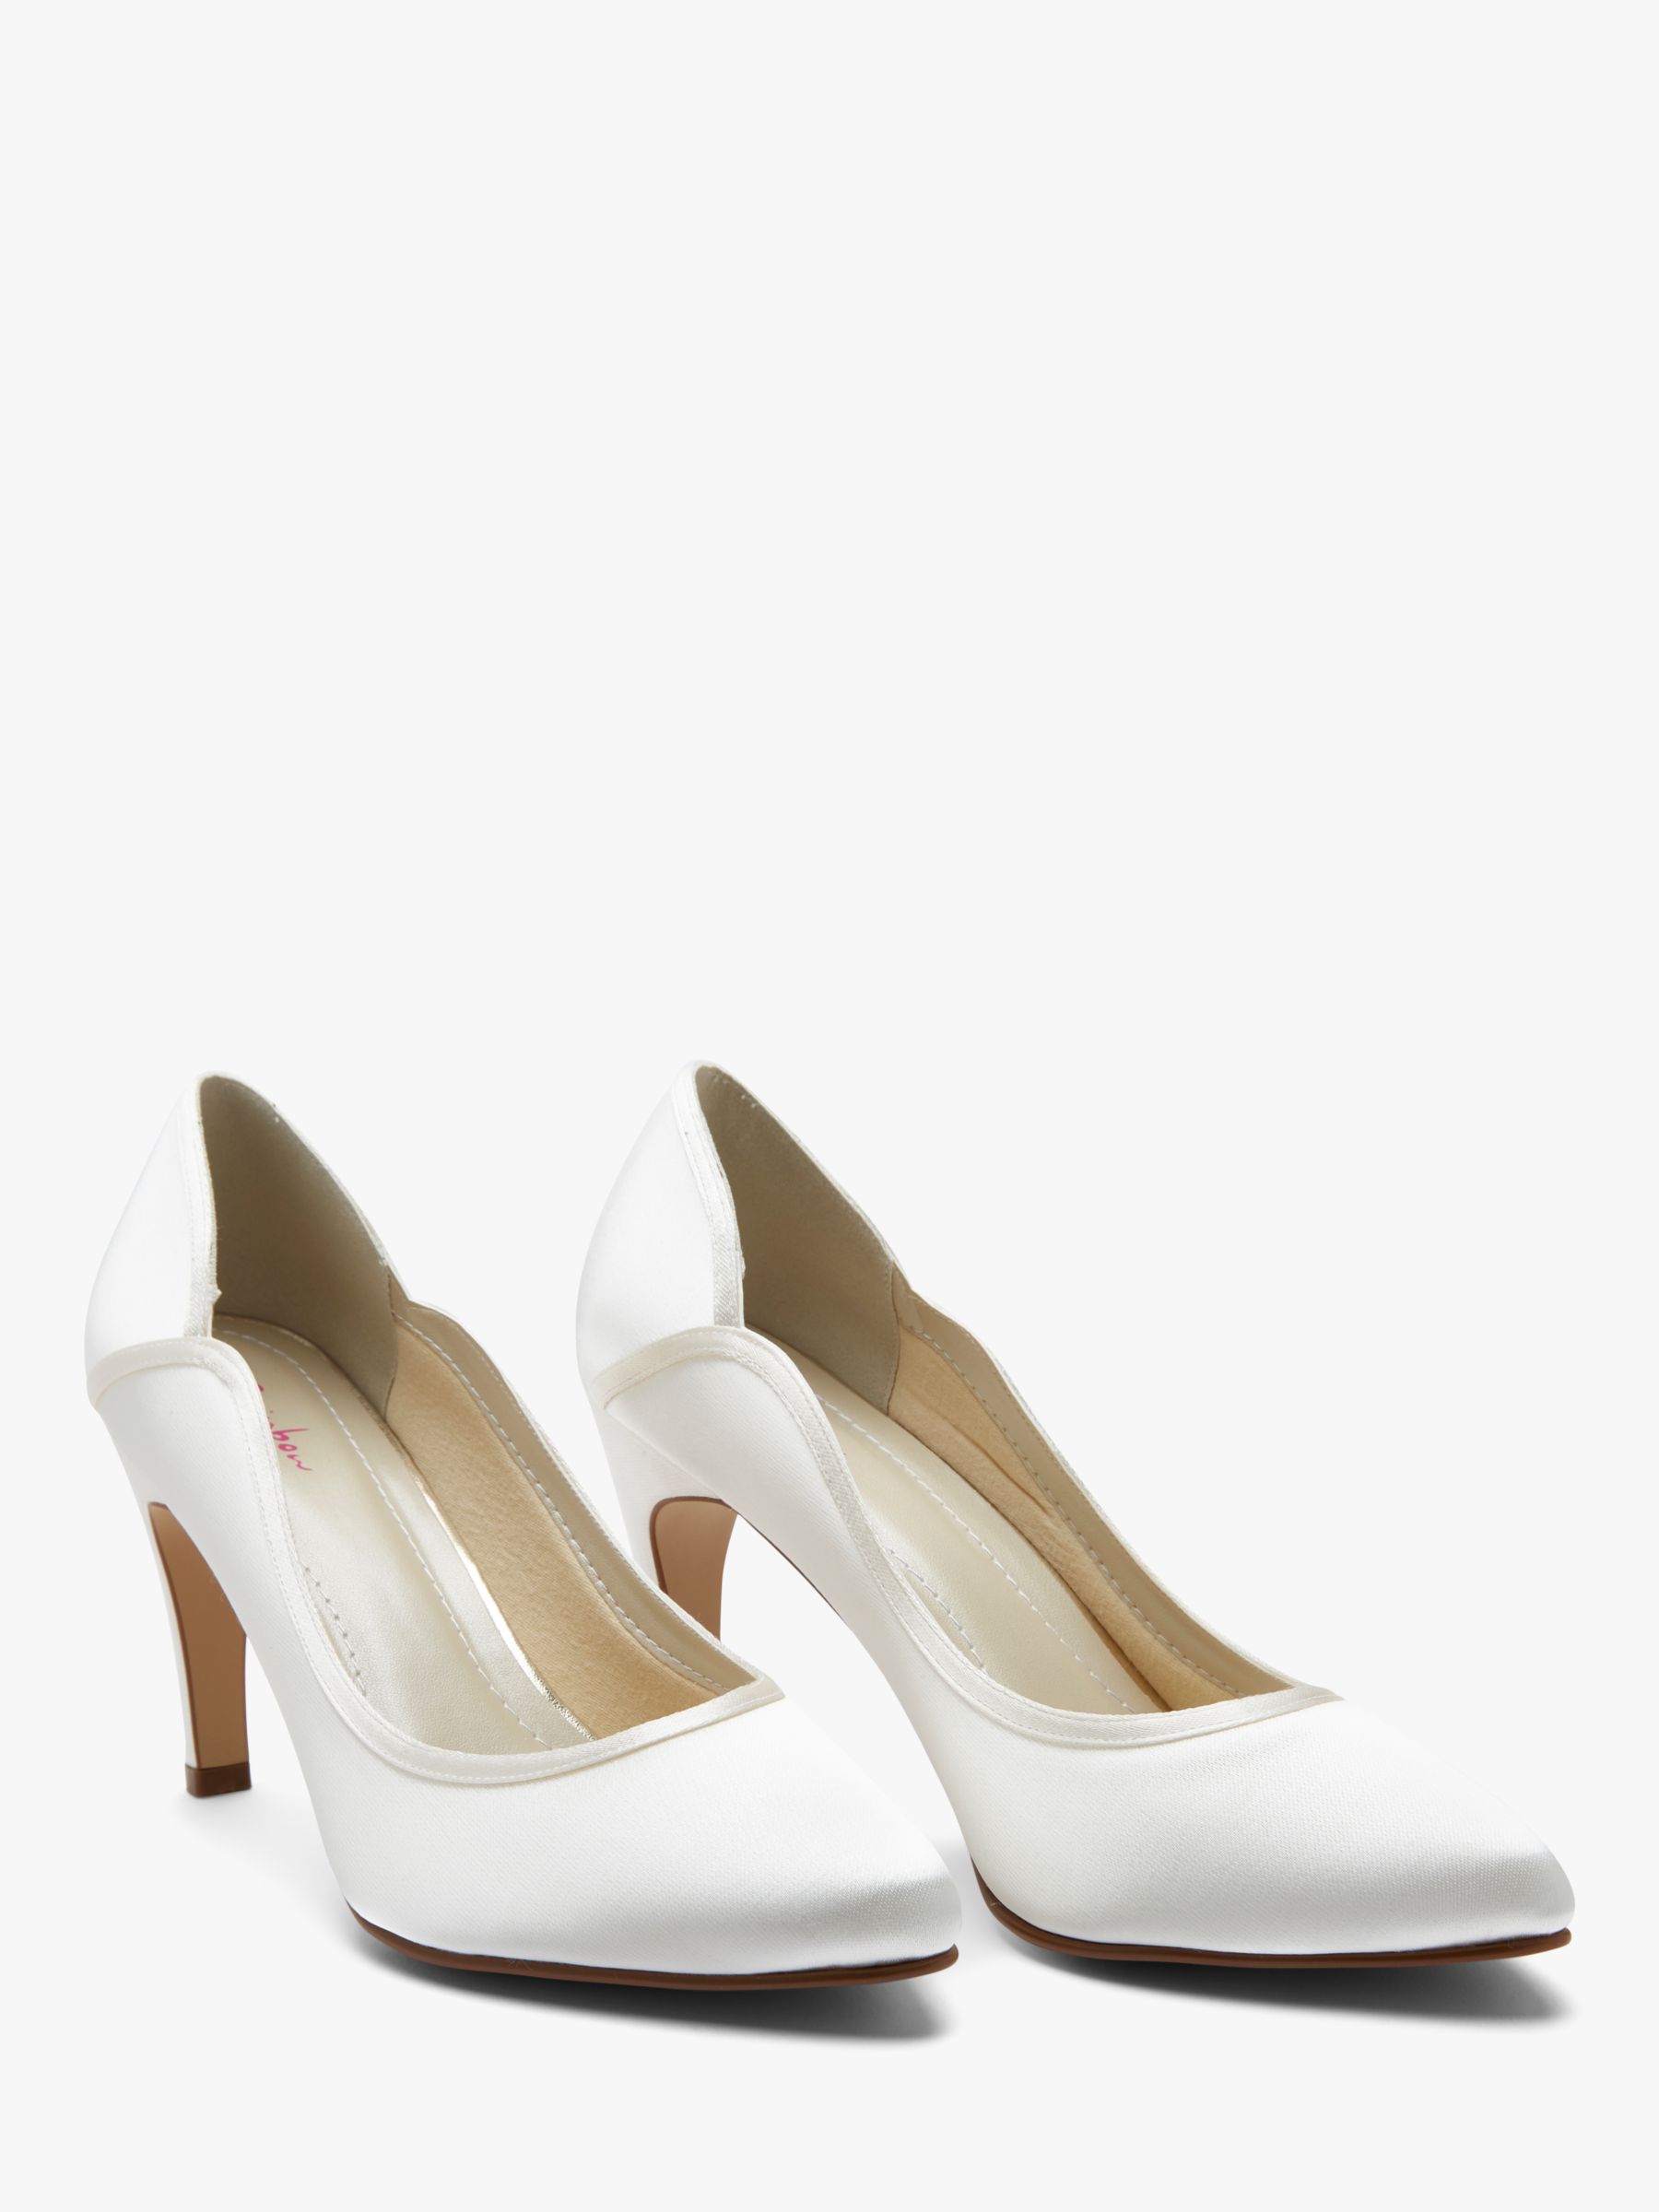 Rainbow Club Lucy Satin Court Shoes, Ivory, 7